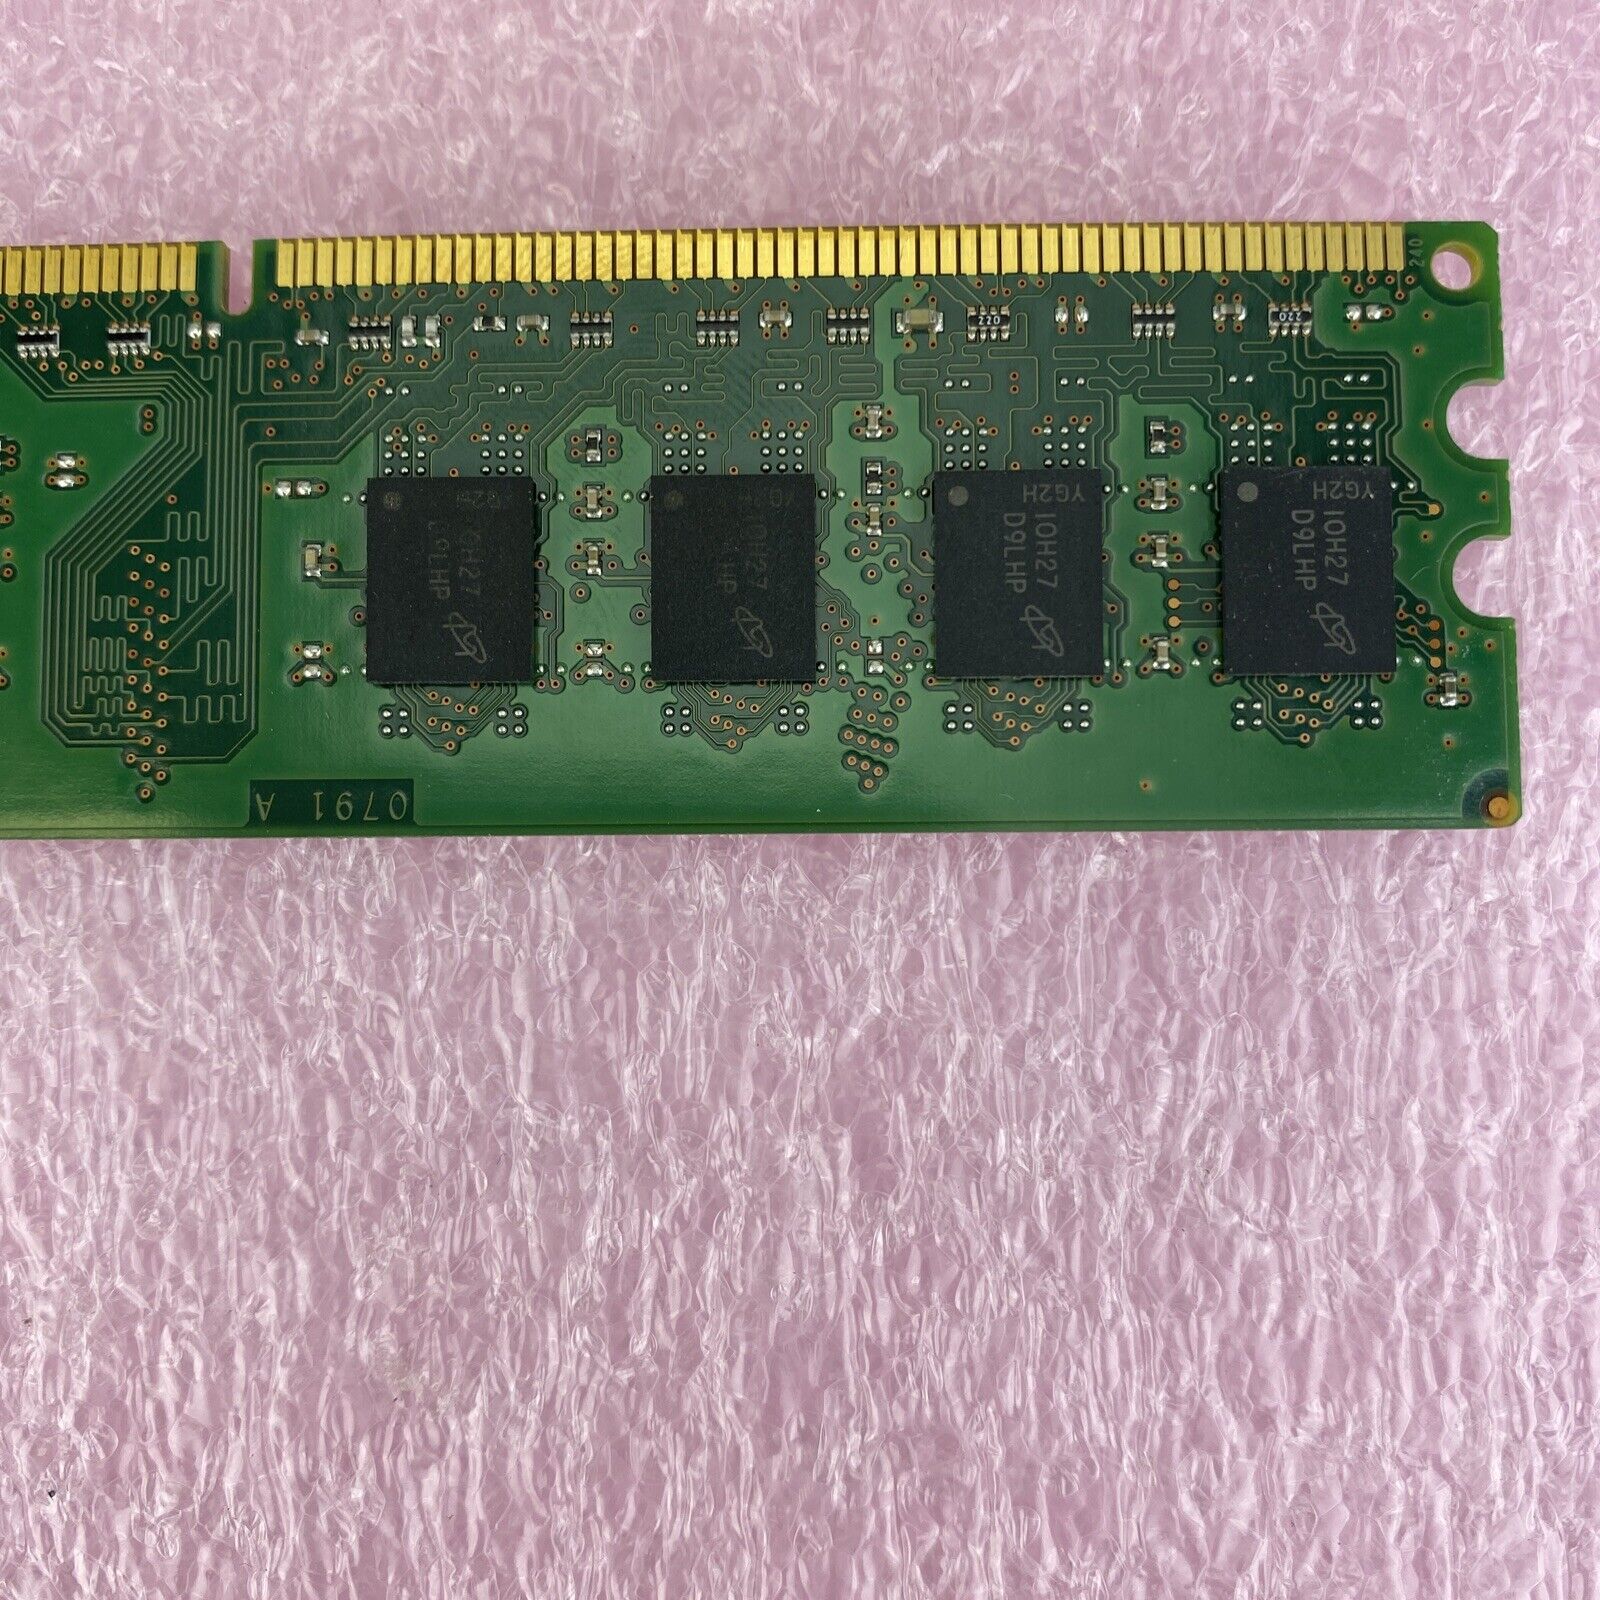 2GB Crucial CT25664AA66 PC2-5300 DDR2 DIMM 667MHz memory RAM